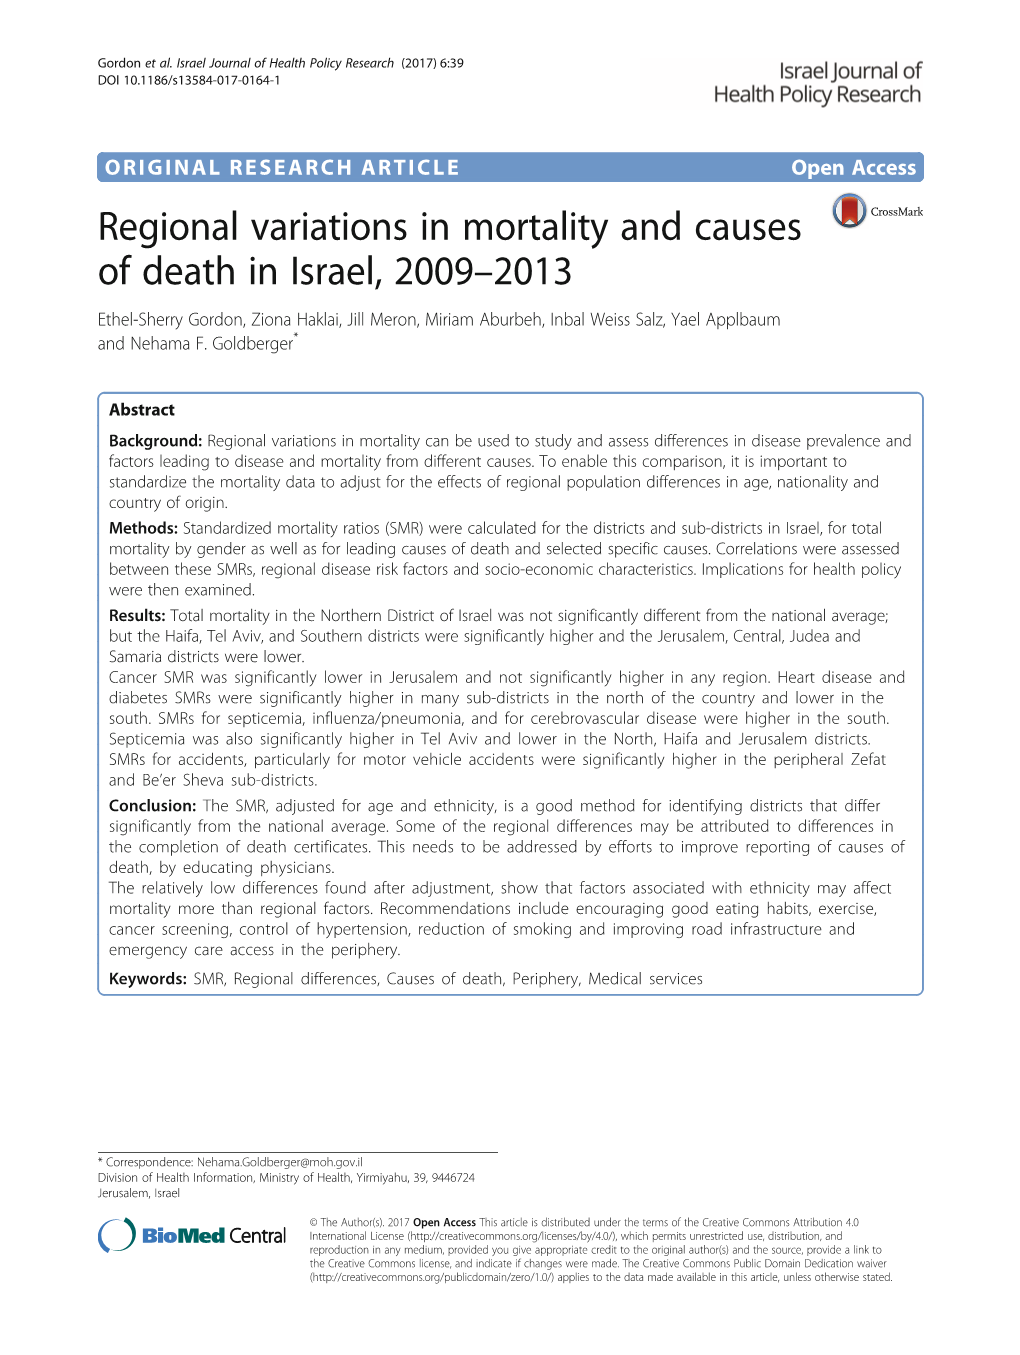 Regional Variations in Mortality and Causes of Death in Israel, 2009–2013